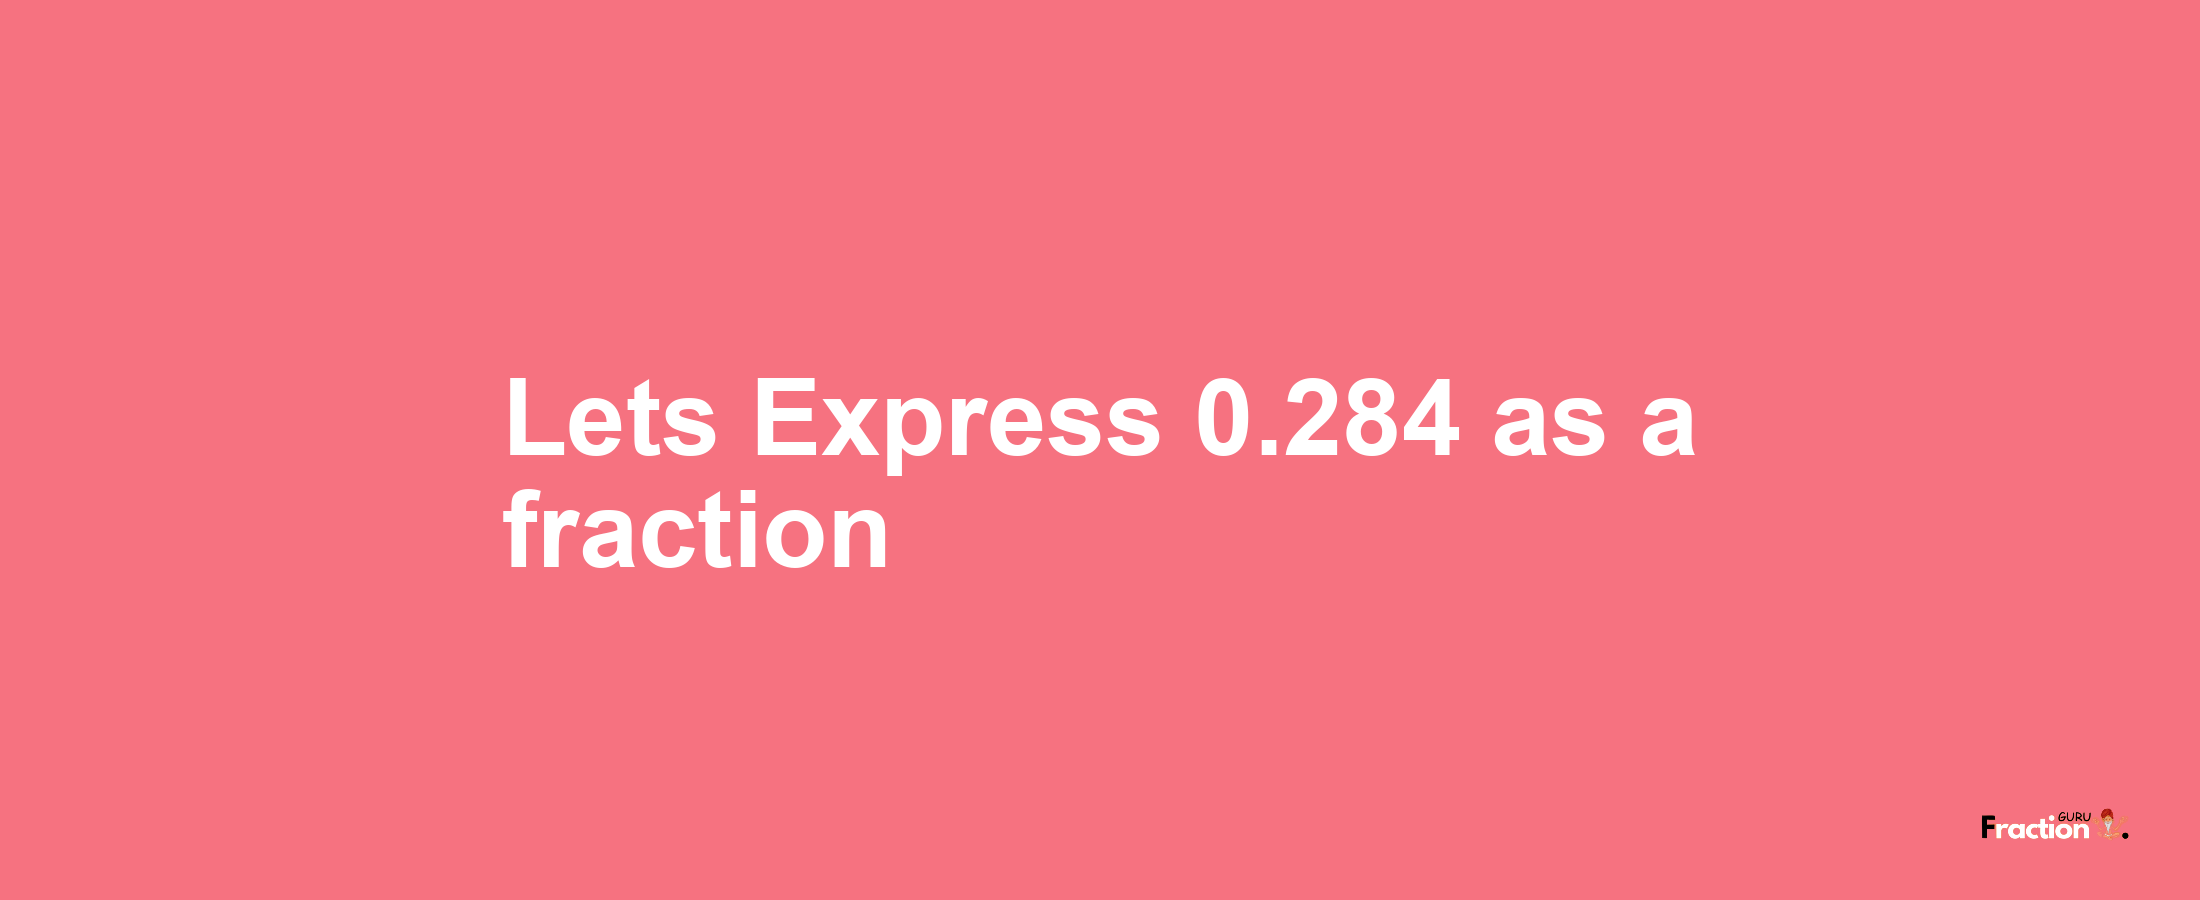 Lets Express 0.284 as afraction